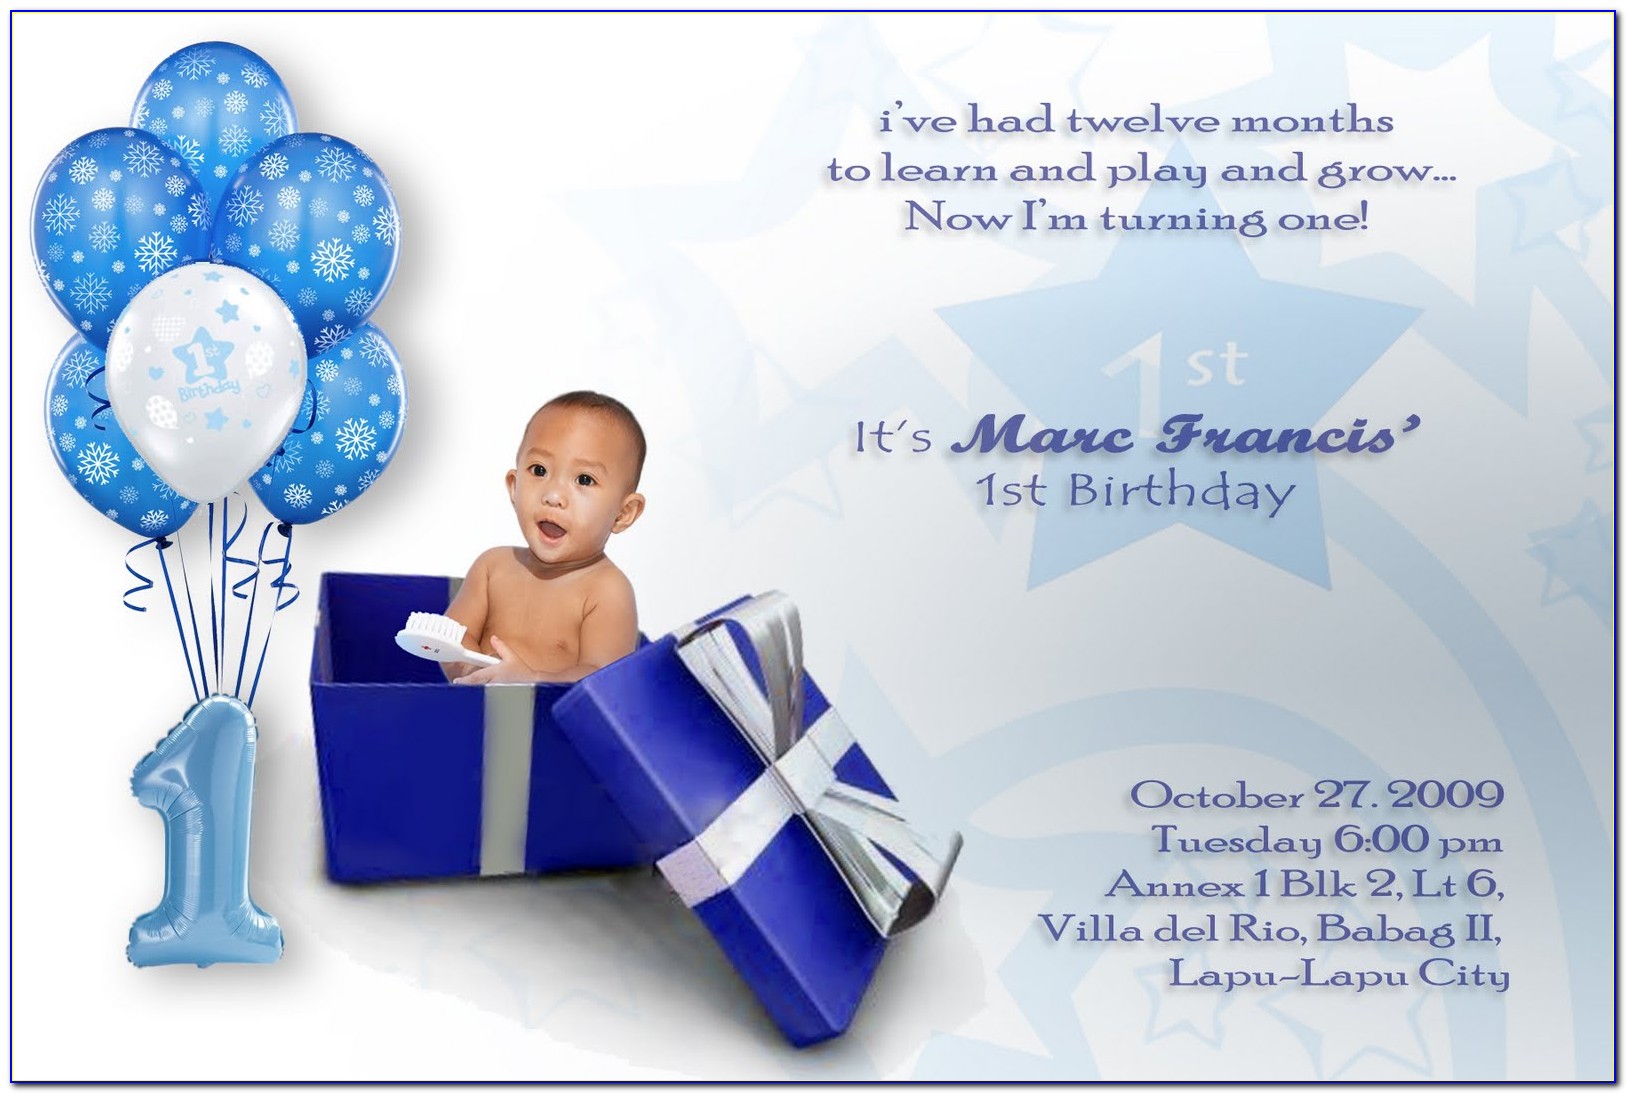 1st Birthday Invitation Message For Baby Boy In Hindi